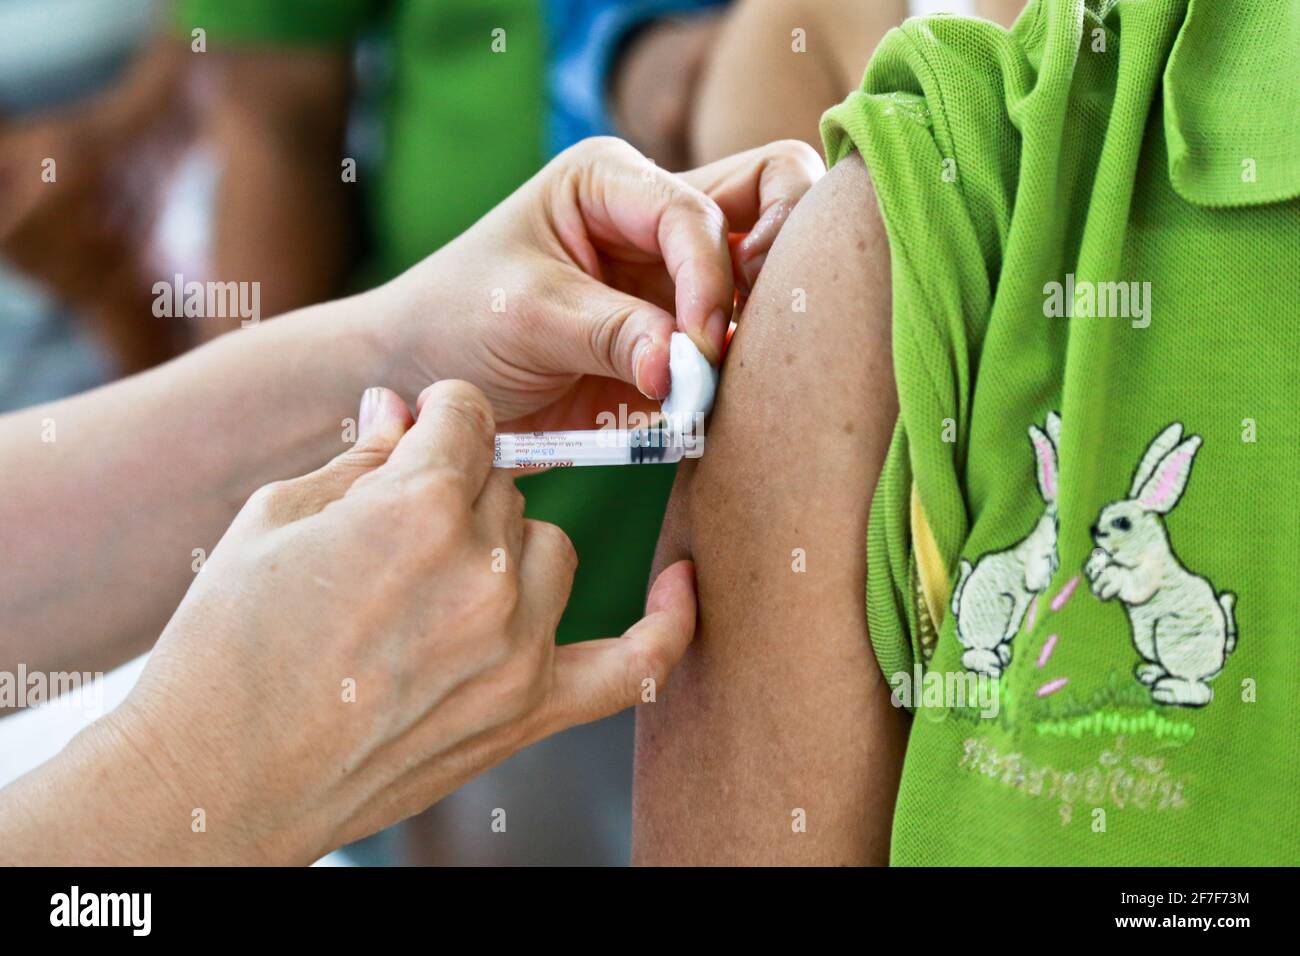 Doctor or nurse hands in medical white gloves using needle syringe drawing blood sample from patient arm in hospital. Stock Photo